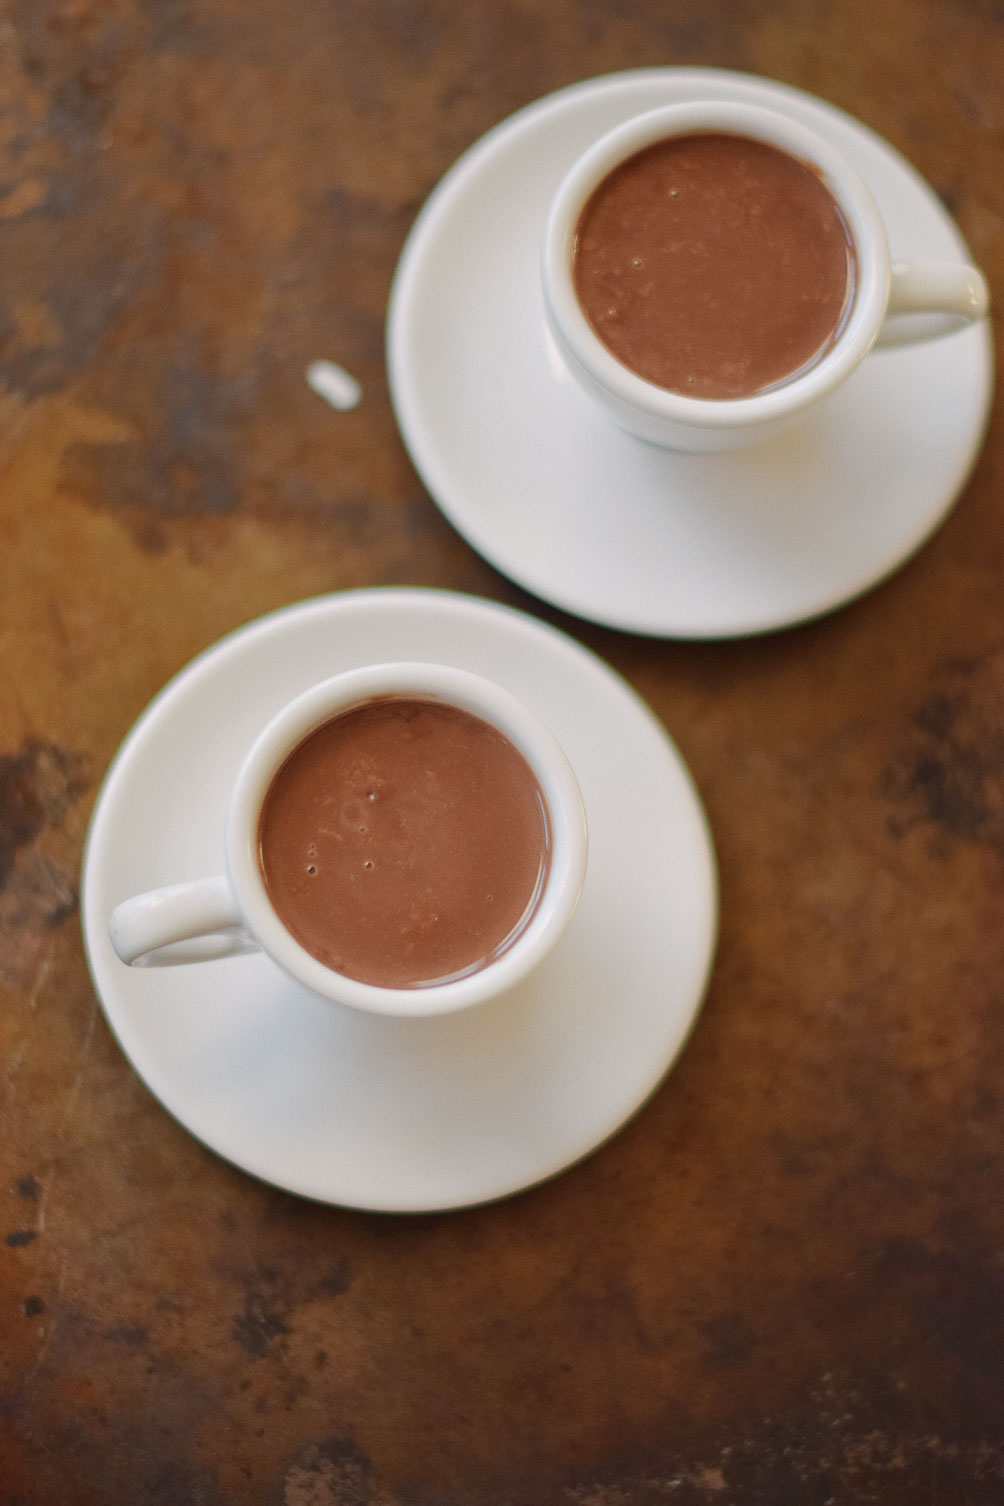 Leslie Musser shares an easy and delicious recipe for decadent sipping chocolate on one brass fox